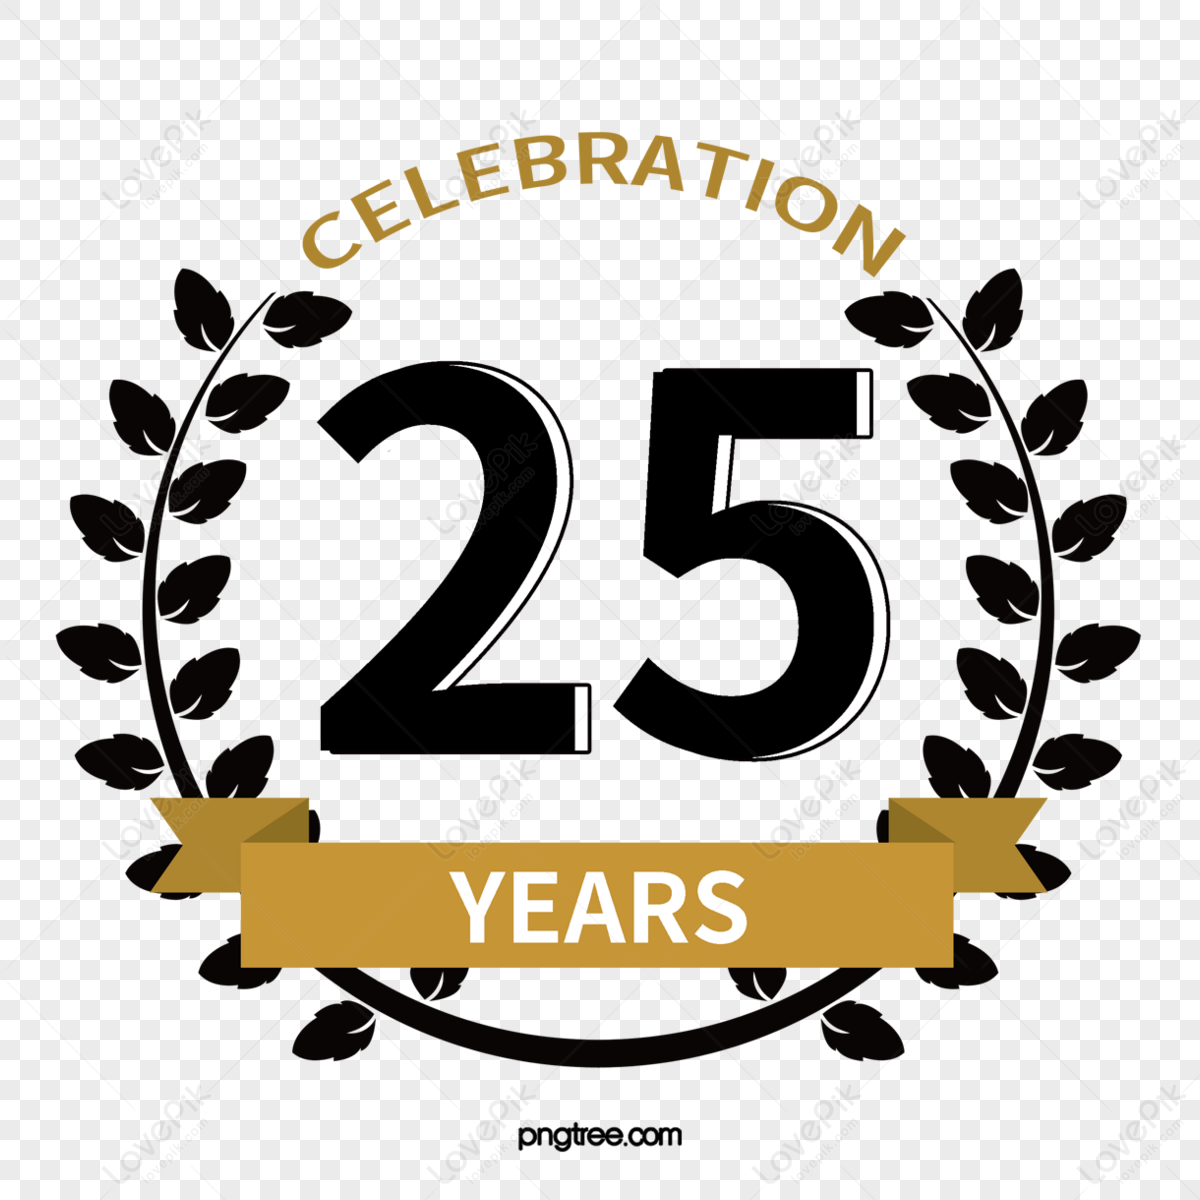 25 Years Experience - Law Logo Element - 402x370 PNG Download - PNGkit